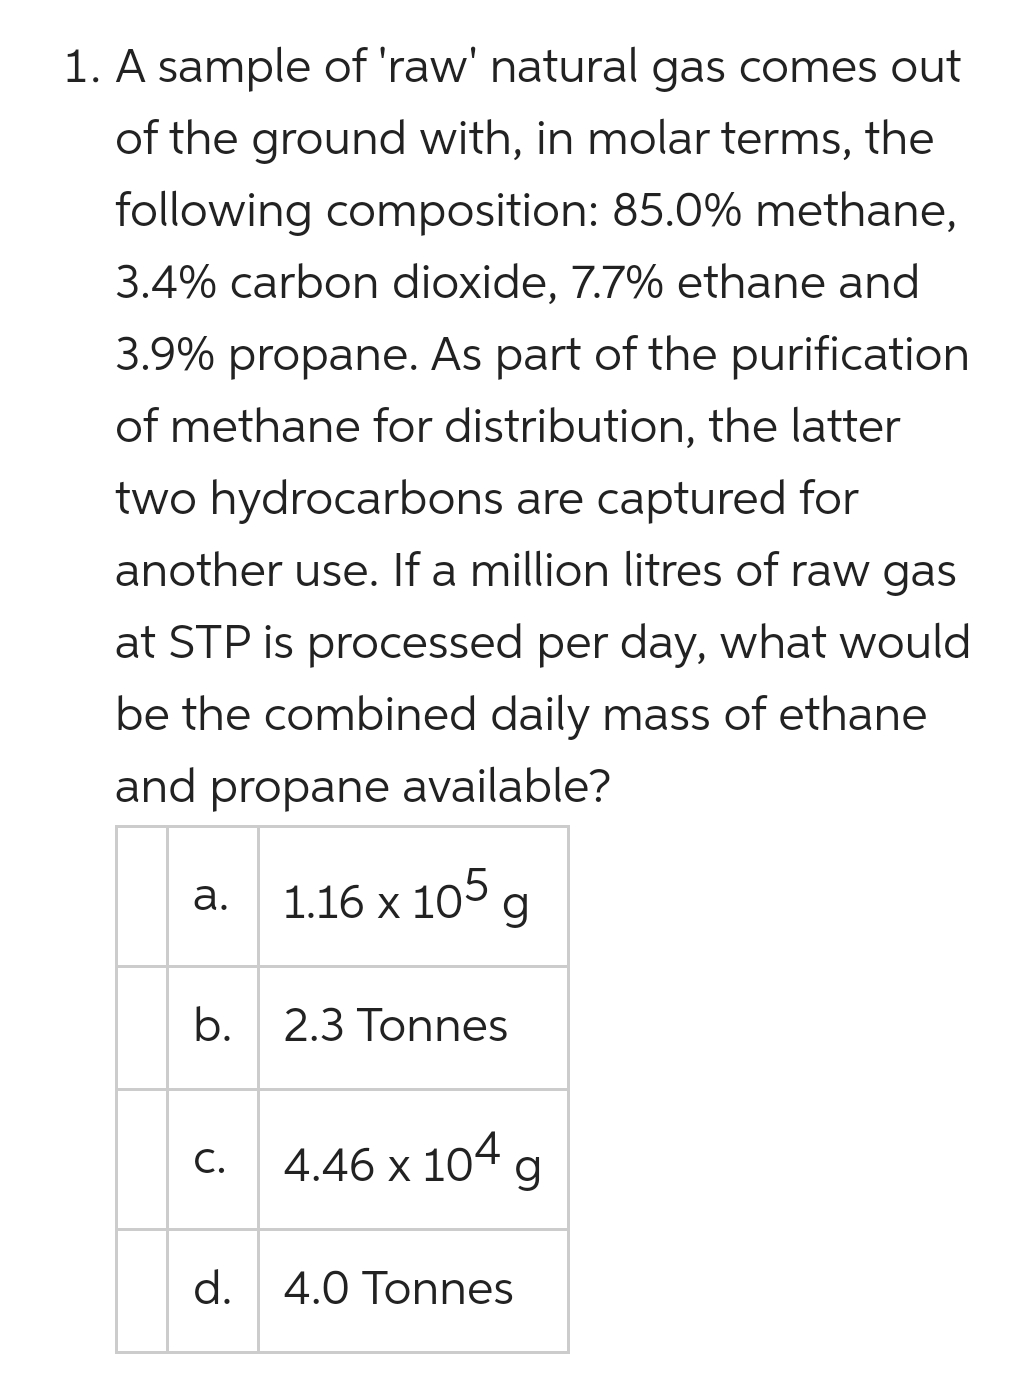 1. A sample of 'raw' natural gas comes out
of the ground with, in molar terms, the
following composition: 85.0% methane,
3.4% carbon dioxide, 7.7% ethane and
3.9% propane. As part of the purification
of methane for distribution, the latter
two hydrocarbons are captured for
another use. If a million litres of raw gas
at STP is processed per day, what would
be the combined daily mass of ethane
and propane available?
a. 1.16 x 105 g
b.
2.3 Tonnes
4.46 x 104 g
С.
d. 4.0 Tonnes
